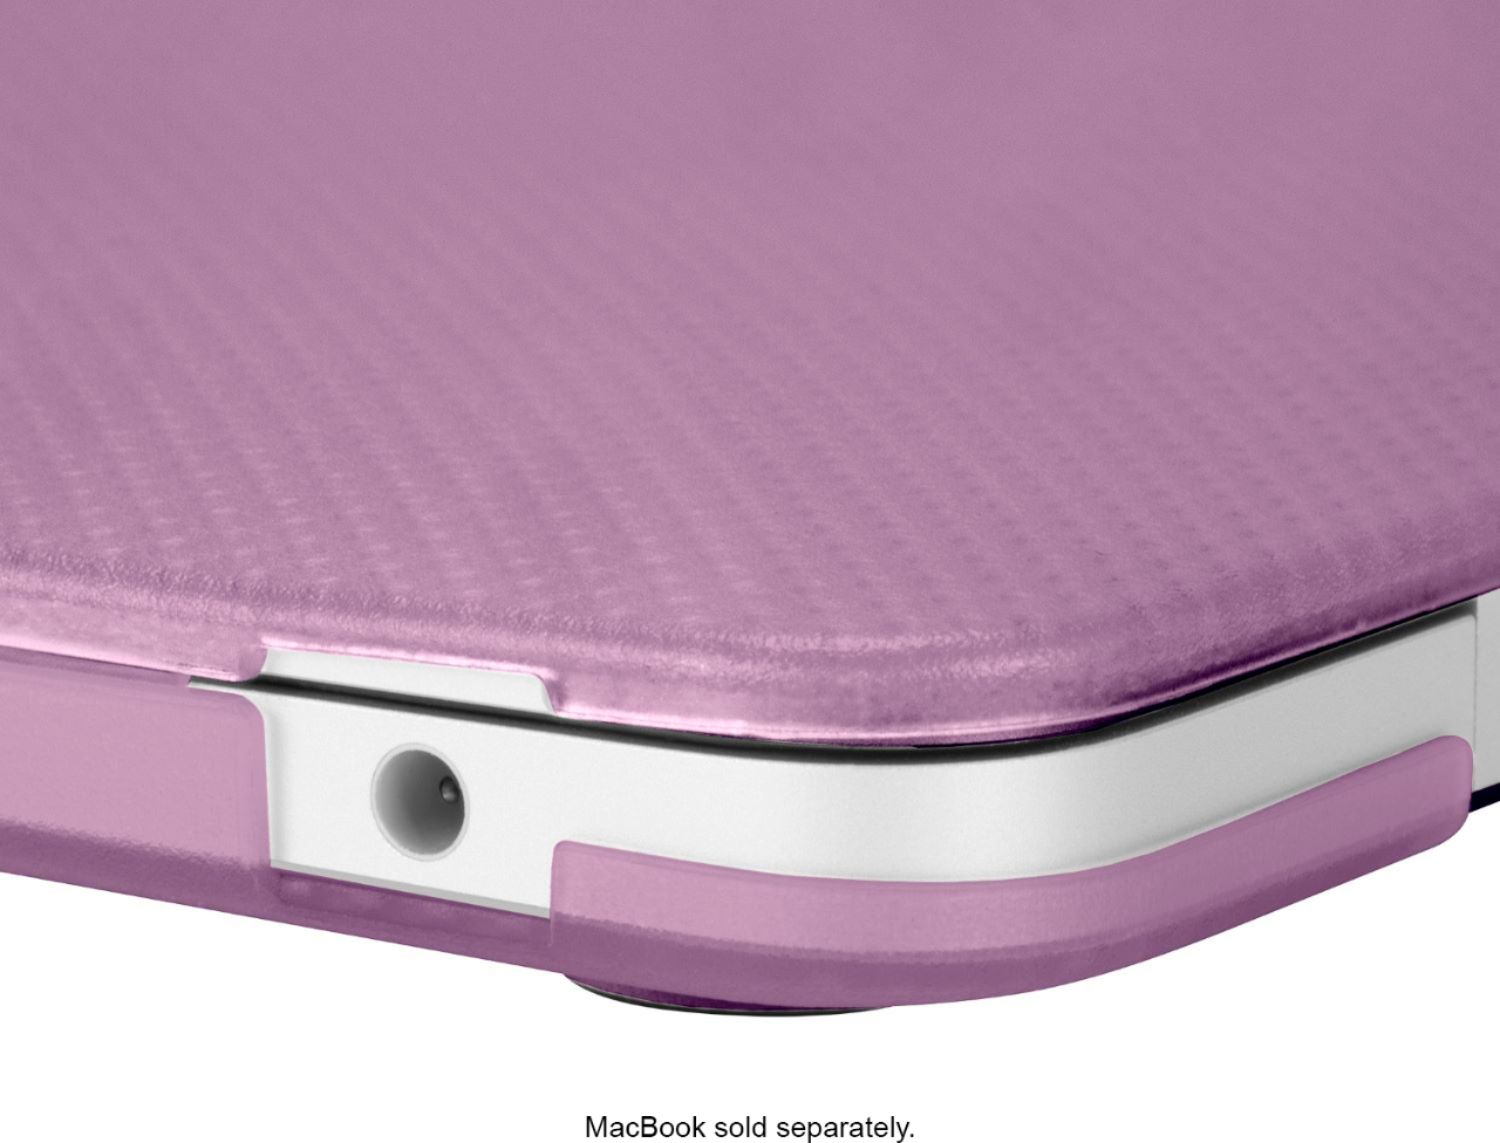 Incase Hardshell Dot Case for the 2020 and M1 2020 13 MacBook Air Nordic  Mauve INMB200615-NOR-B - Best Buy